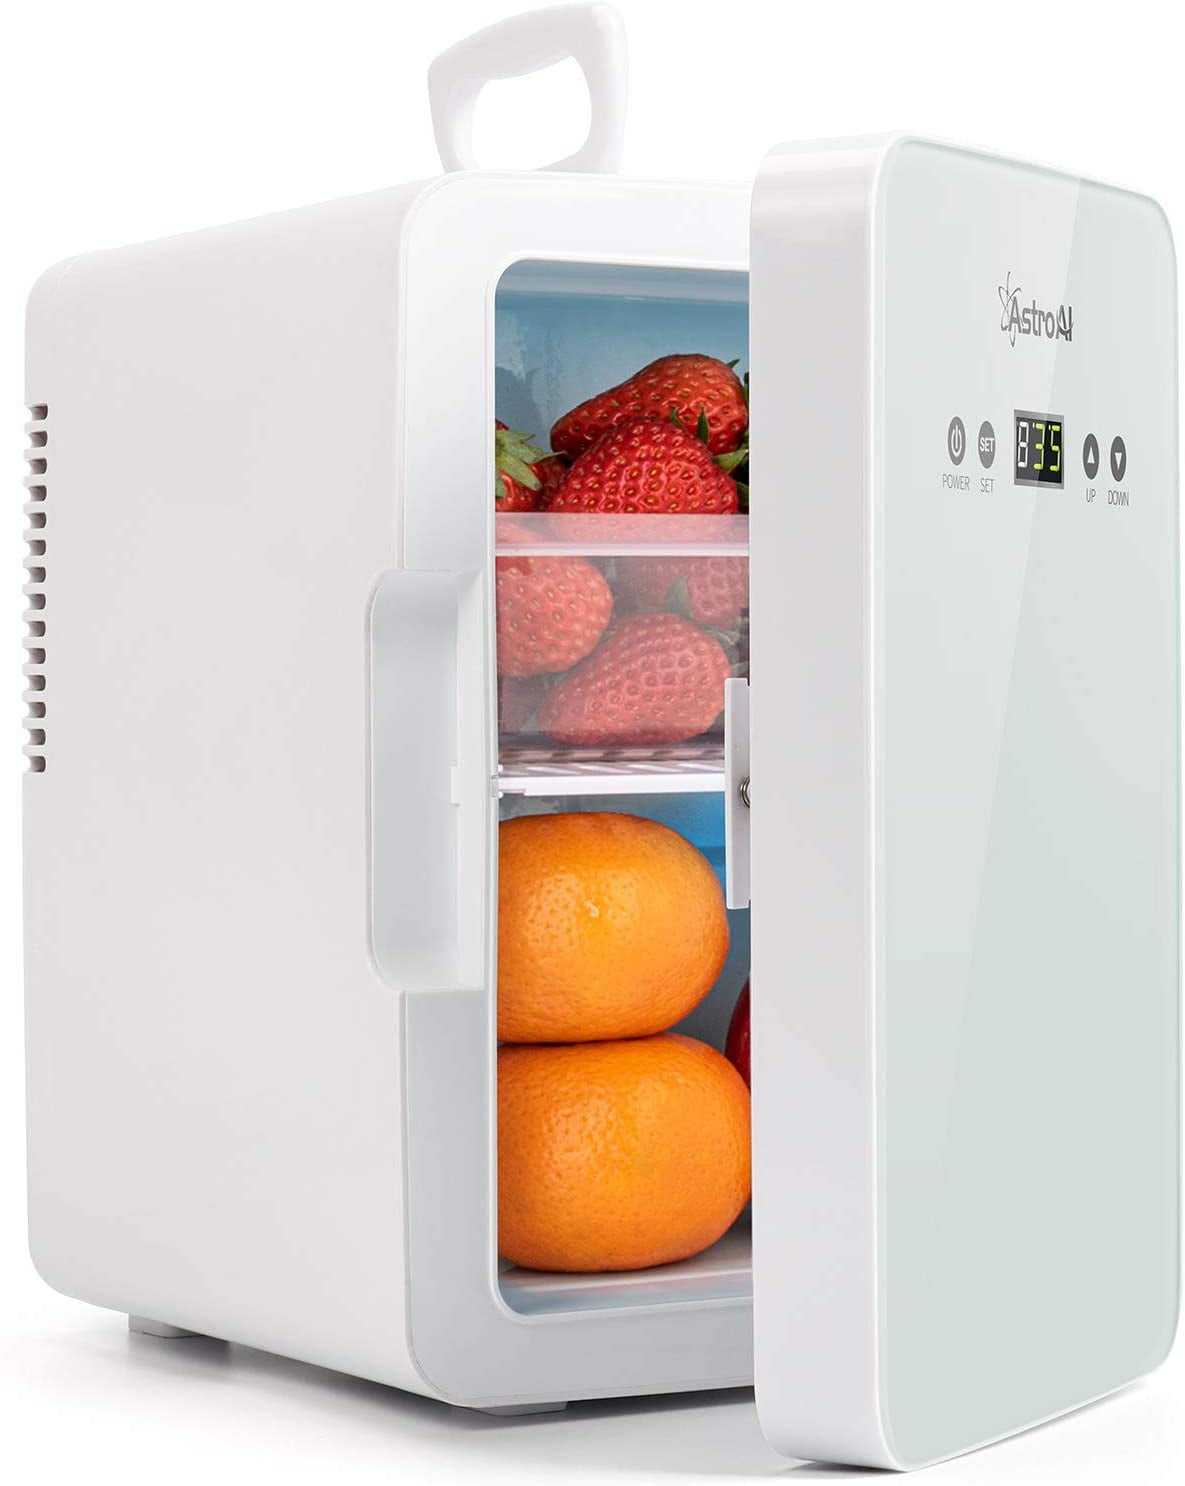 Thermoelectric Cooler and Warmer,Car Refrigerator,Mini Refrigerater for Home,Car 16L/17 Can Portable Electronic Mini Fridge Transparent Door Compact Fridge RV,Bedroom,Office,Dorm